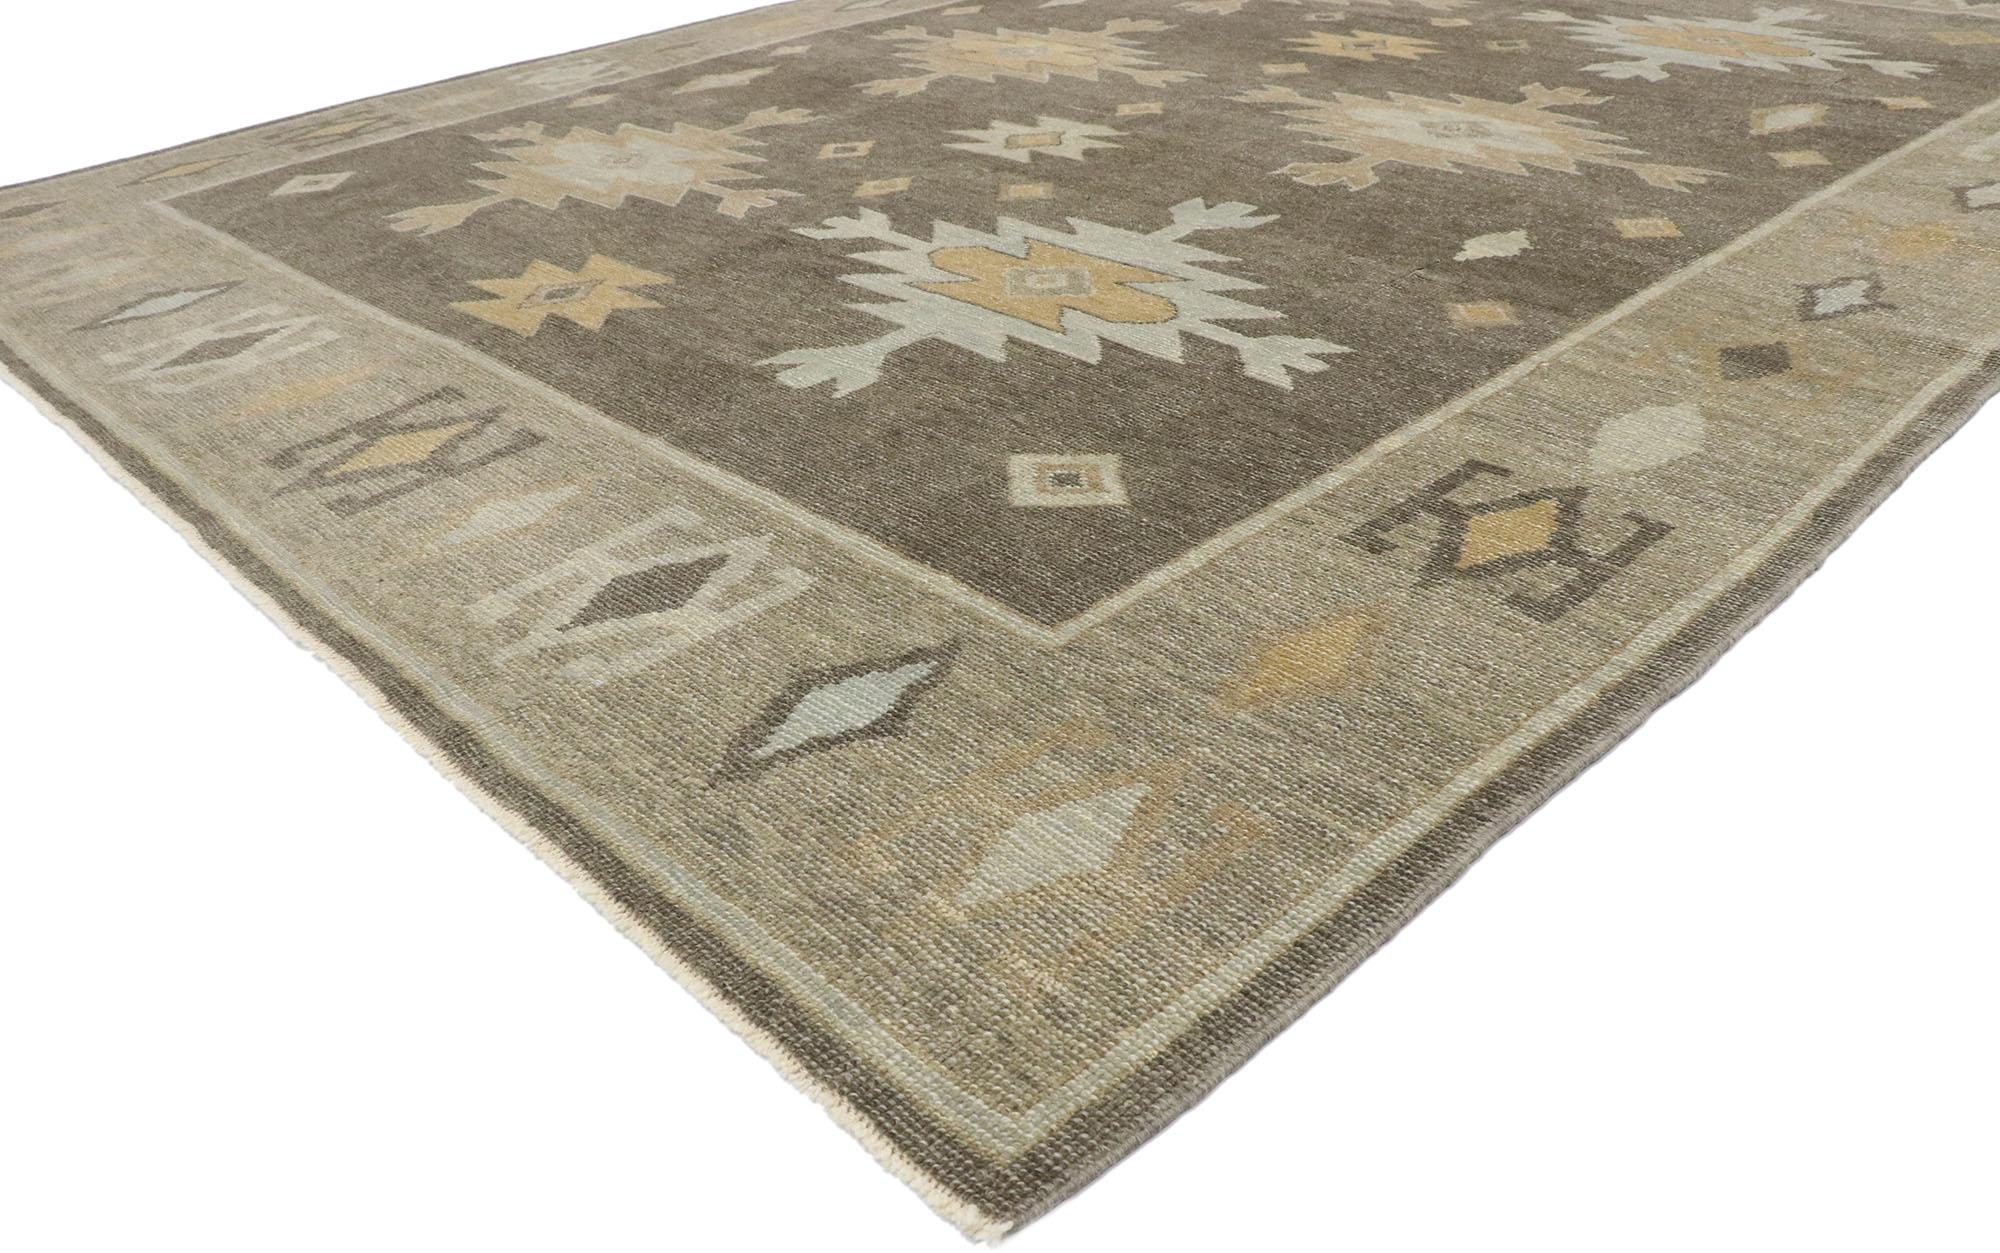 53434 Modern Earth-Tone Turkish Oushak Rug, 09'03 x 12'01. 
Subtle Southwest meets luxury lodge in this hand knotted wool Turkish Oushak rug. The Aztec pattern and earth-tone colors woven into this piece work together creating a cozy, inviting and